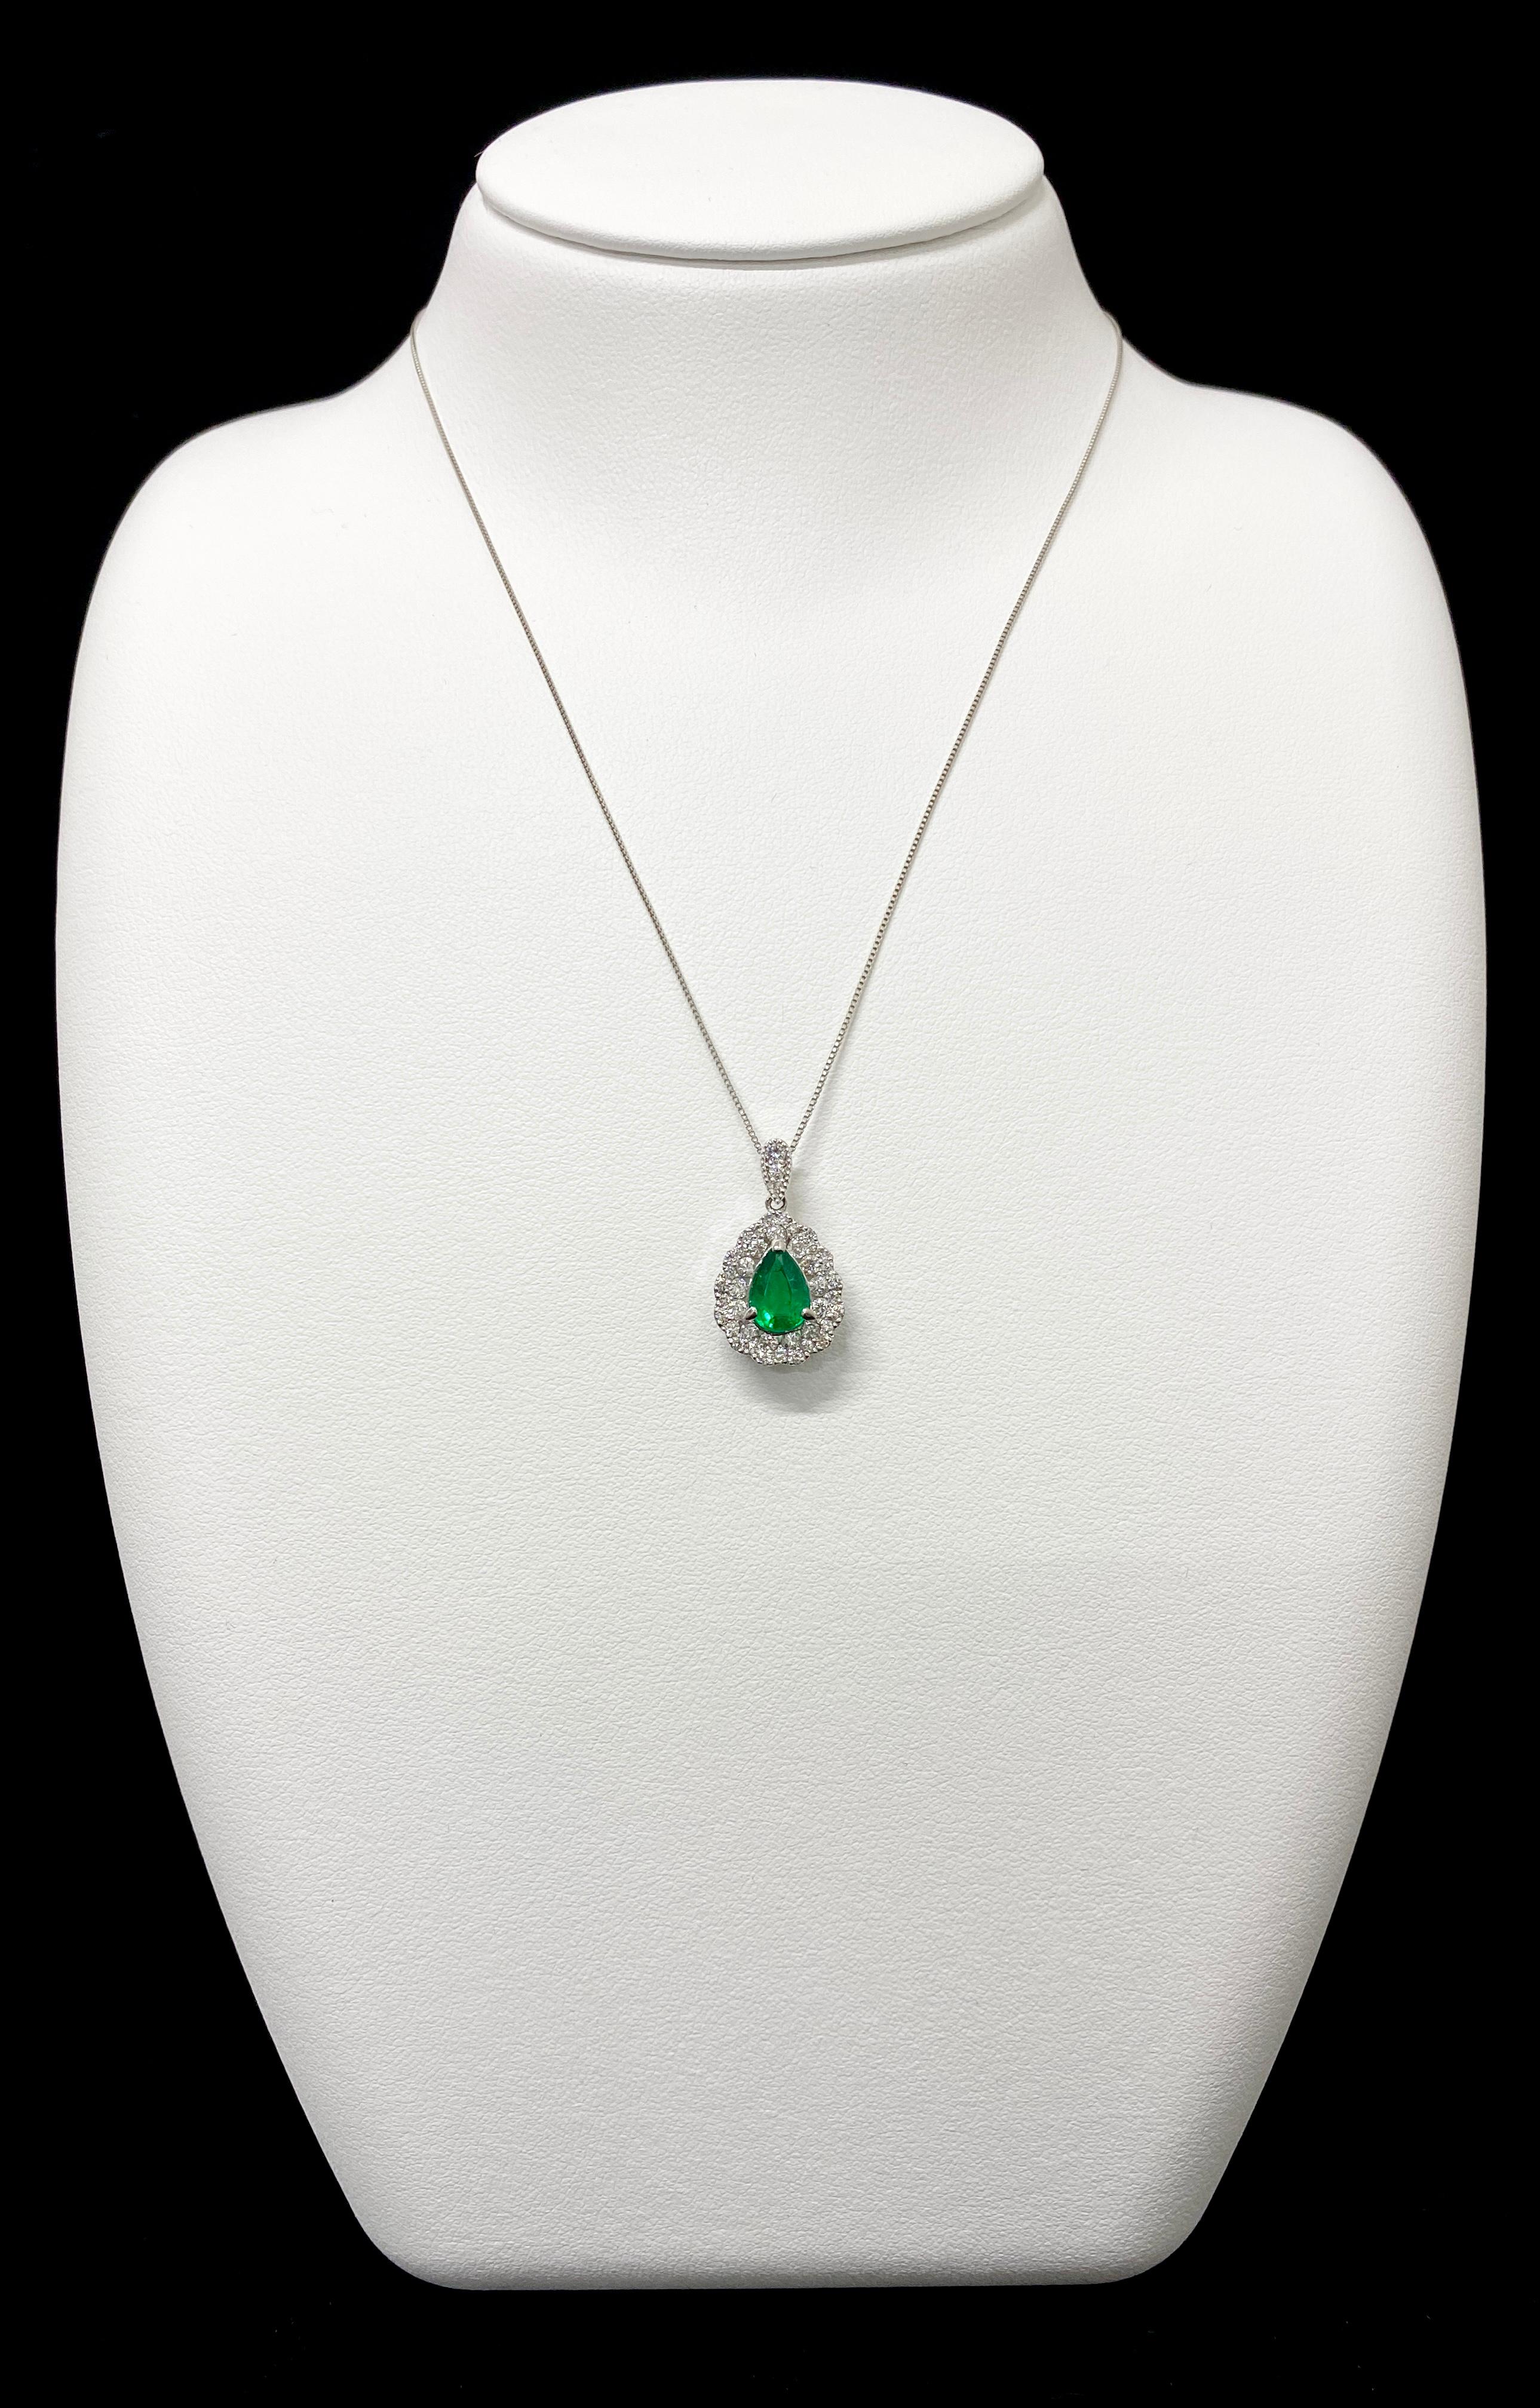 A stunning Pendant featuring a 0.82 Carat, Natural Emerald and 0.52 Carats of Diamond Accents set in Platinum. People have admired emerald’s green for thousands of years. Emeralds have always been associated with the lushest landscapes and the